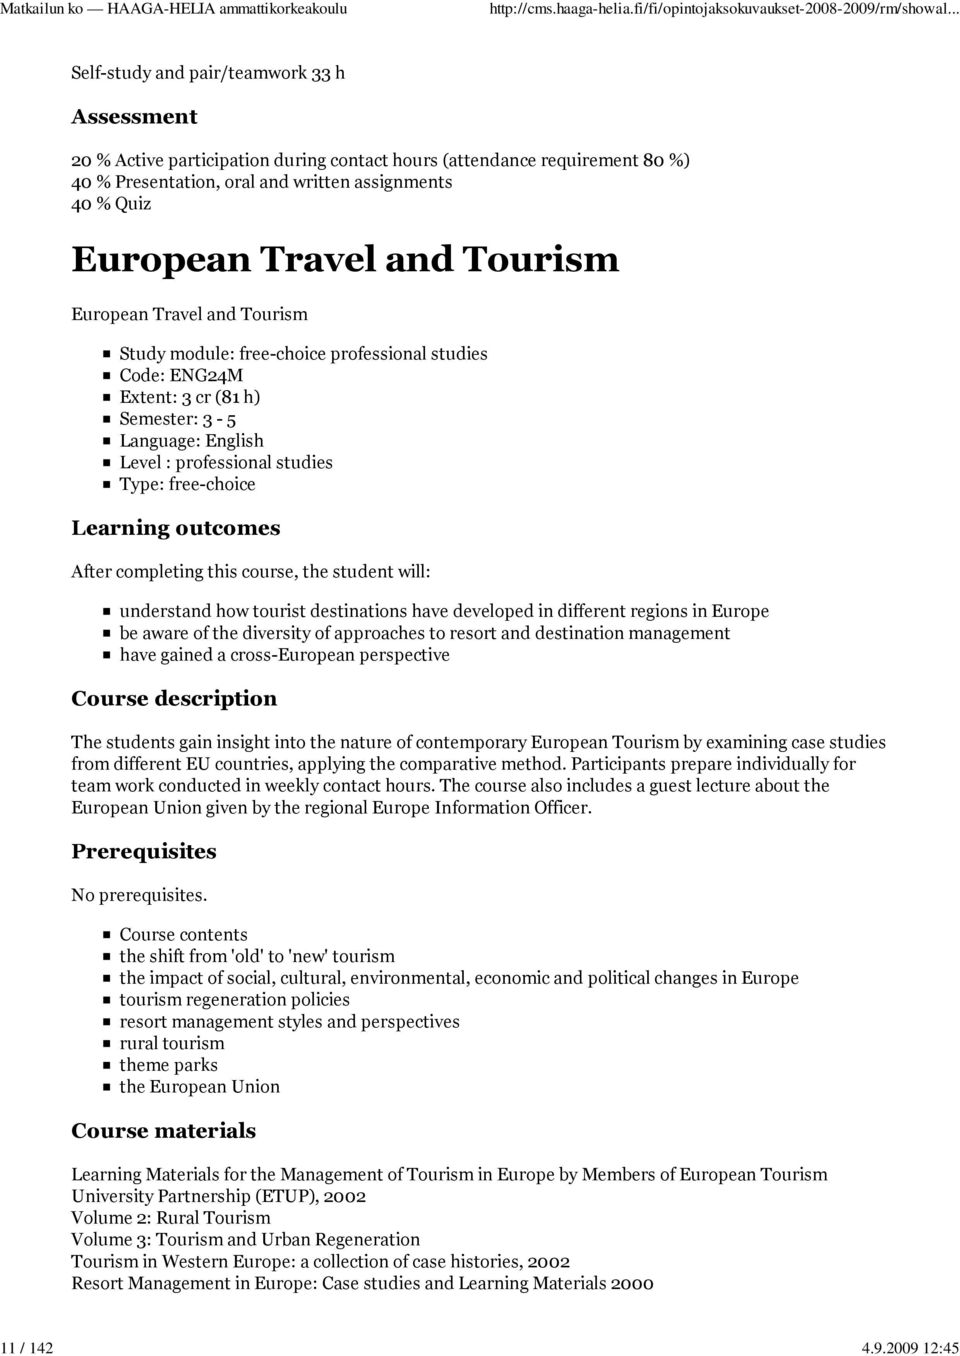 Travel and Tourism European Travel and Tourism Study module: free-choice professional studies Code: ENG24M Extent: 3 cr (81 h) Semester: 3-5 Language: English Level : professional studies Type: